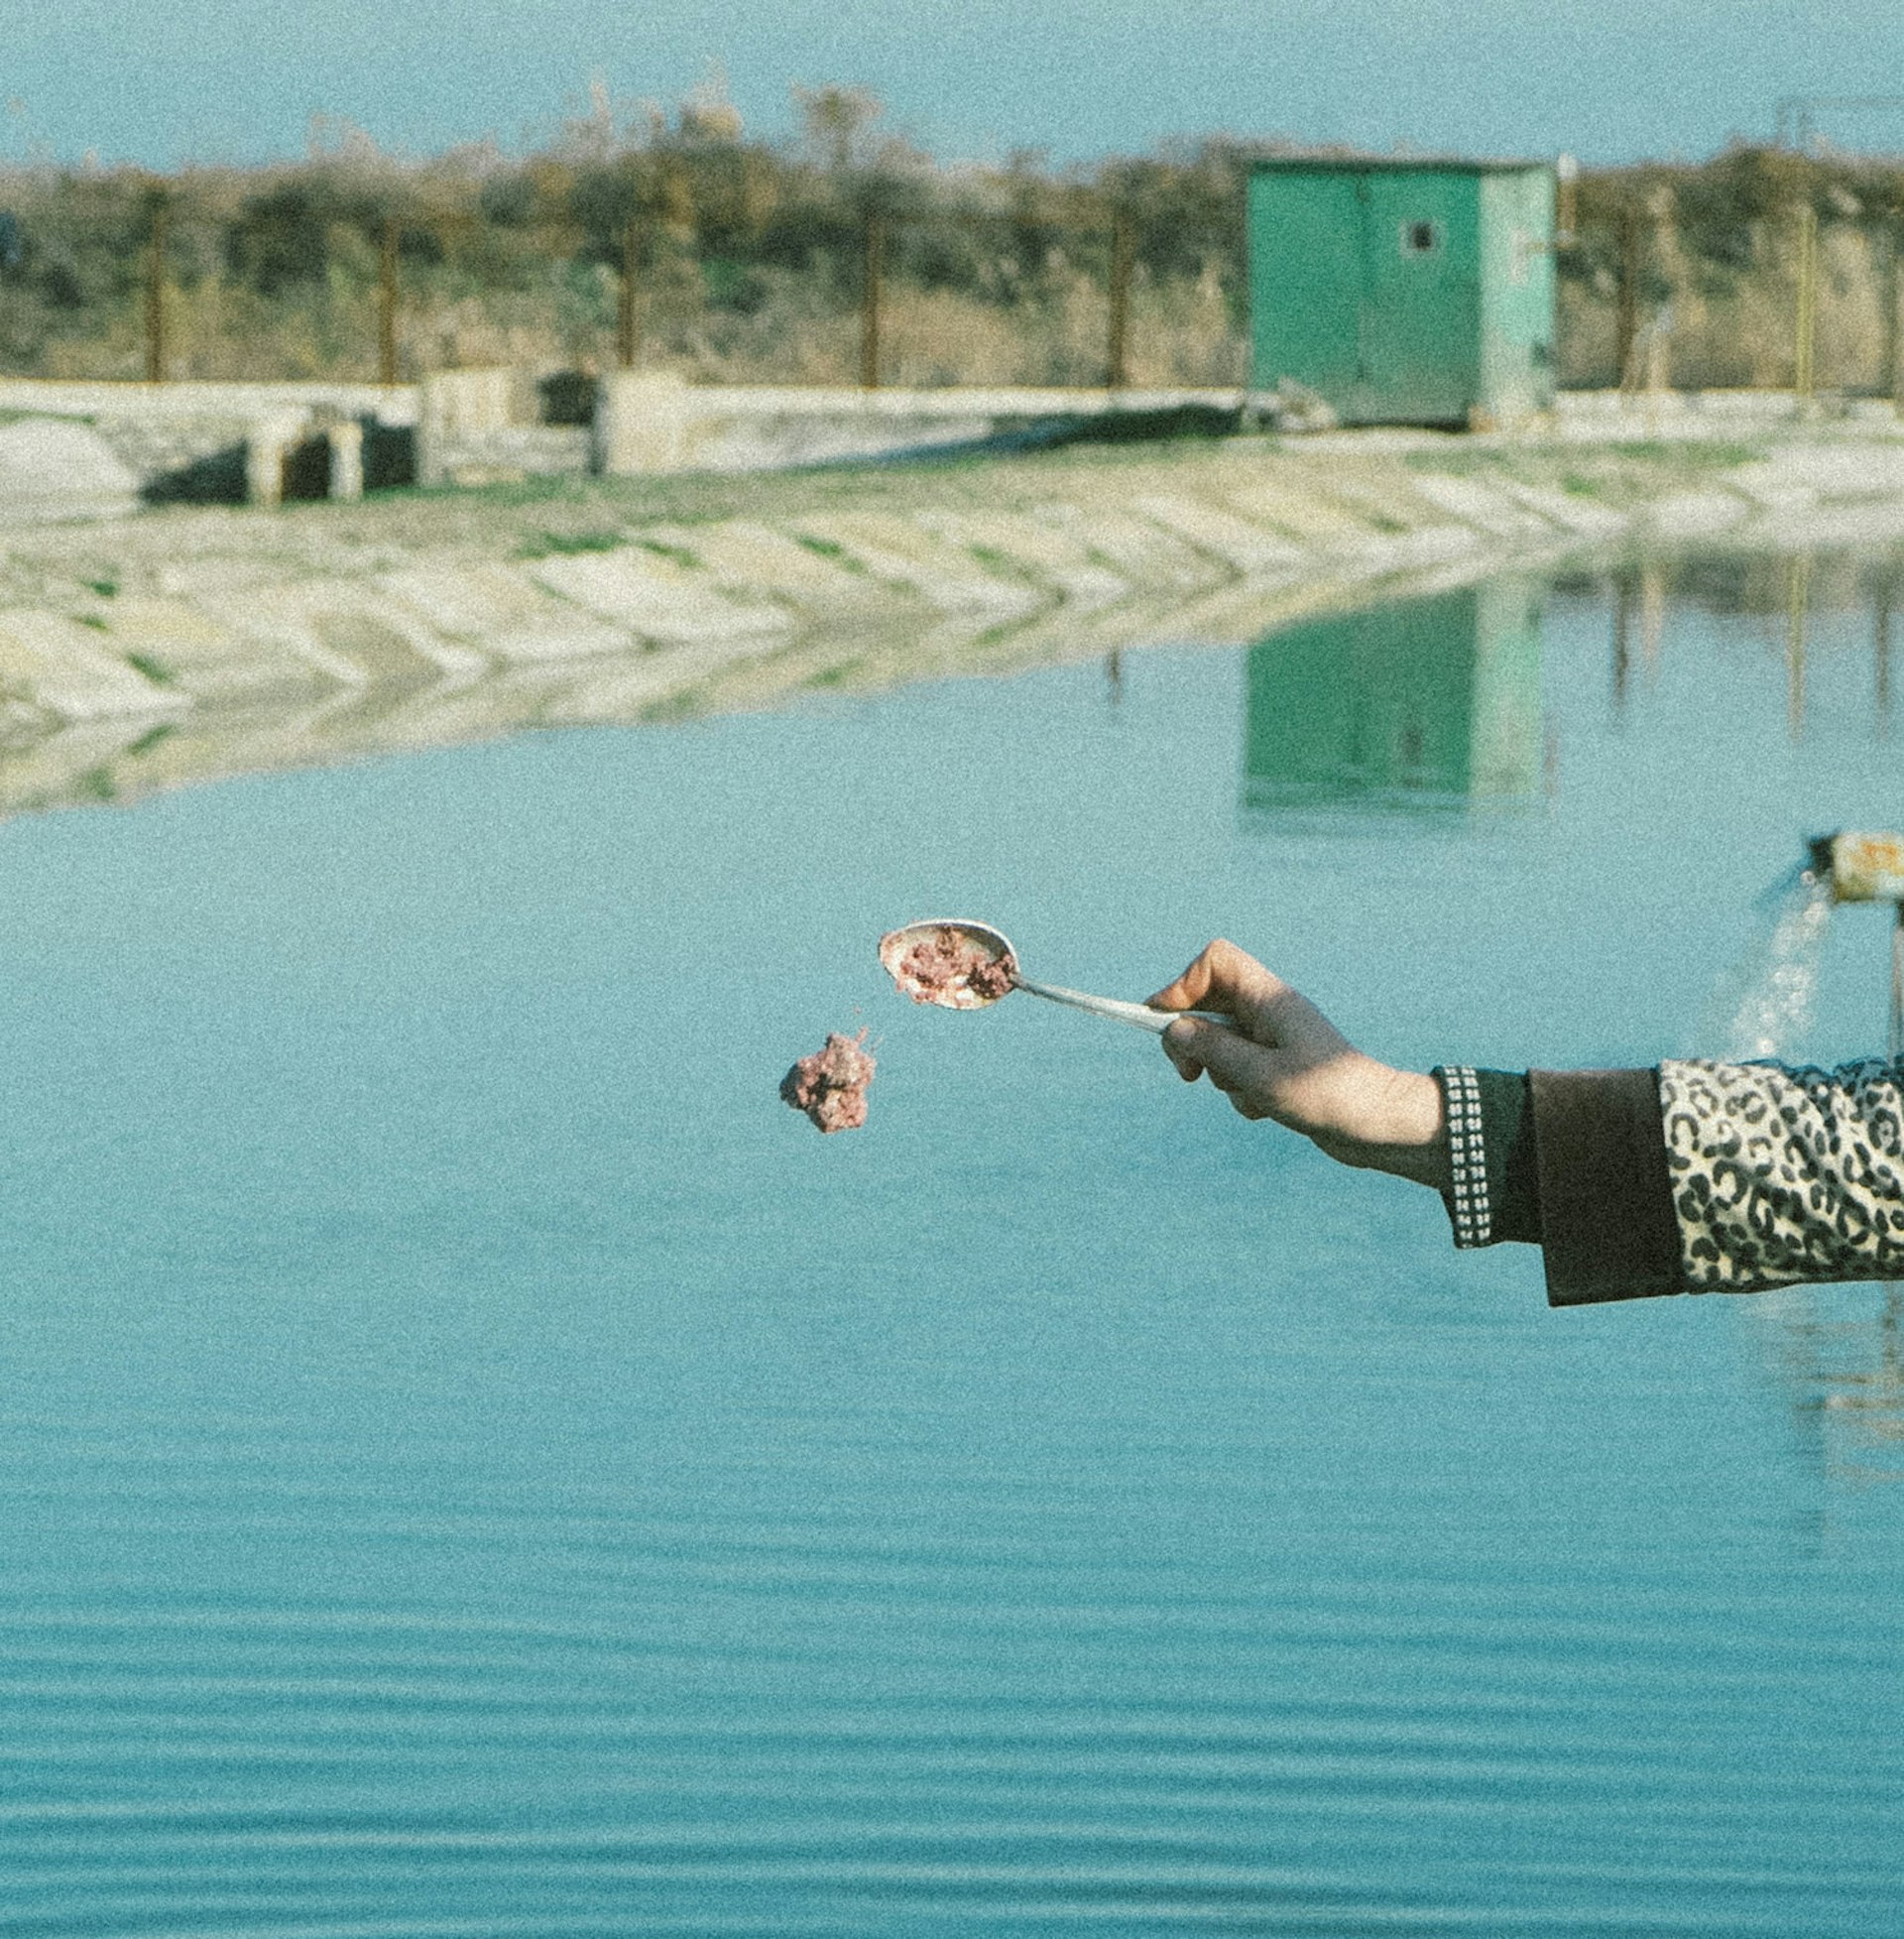 Images that reveal the untold stories of South Caucasus